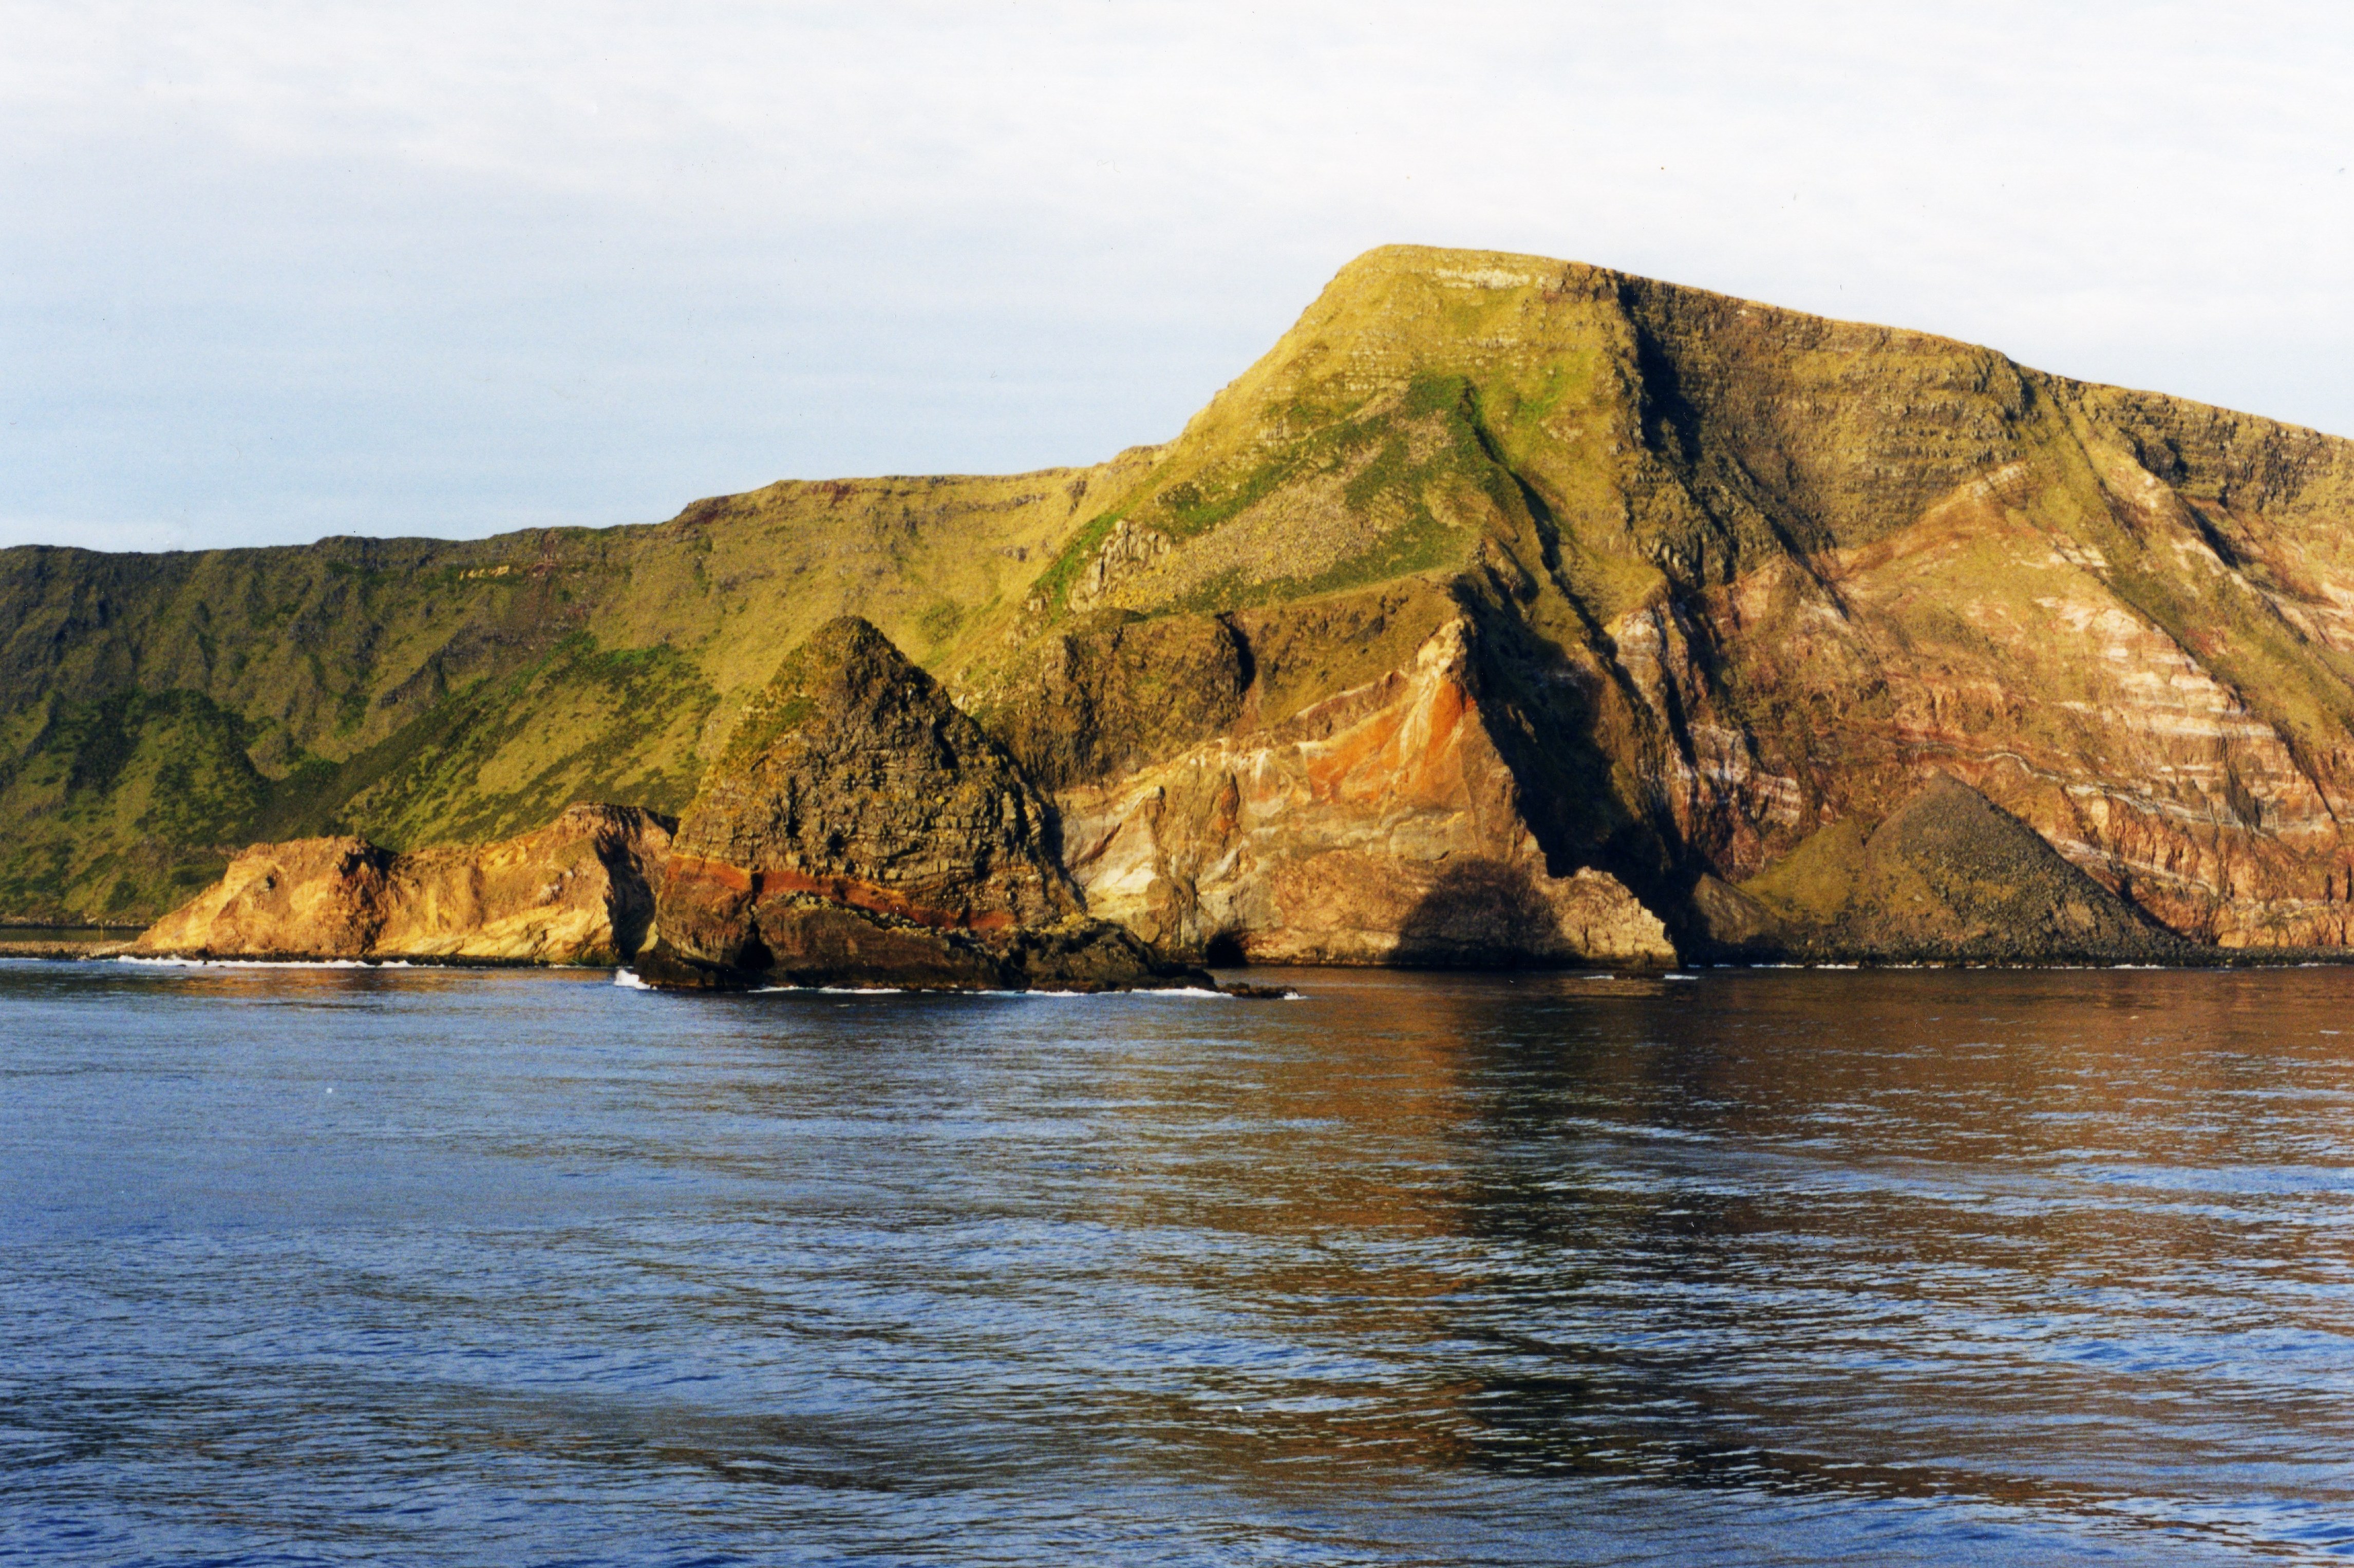 Saint-Paul Island with Quille Rock in the foreground.